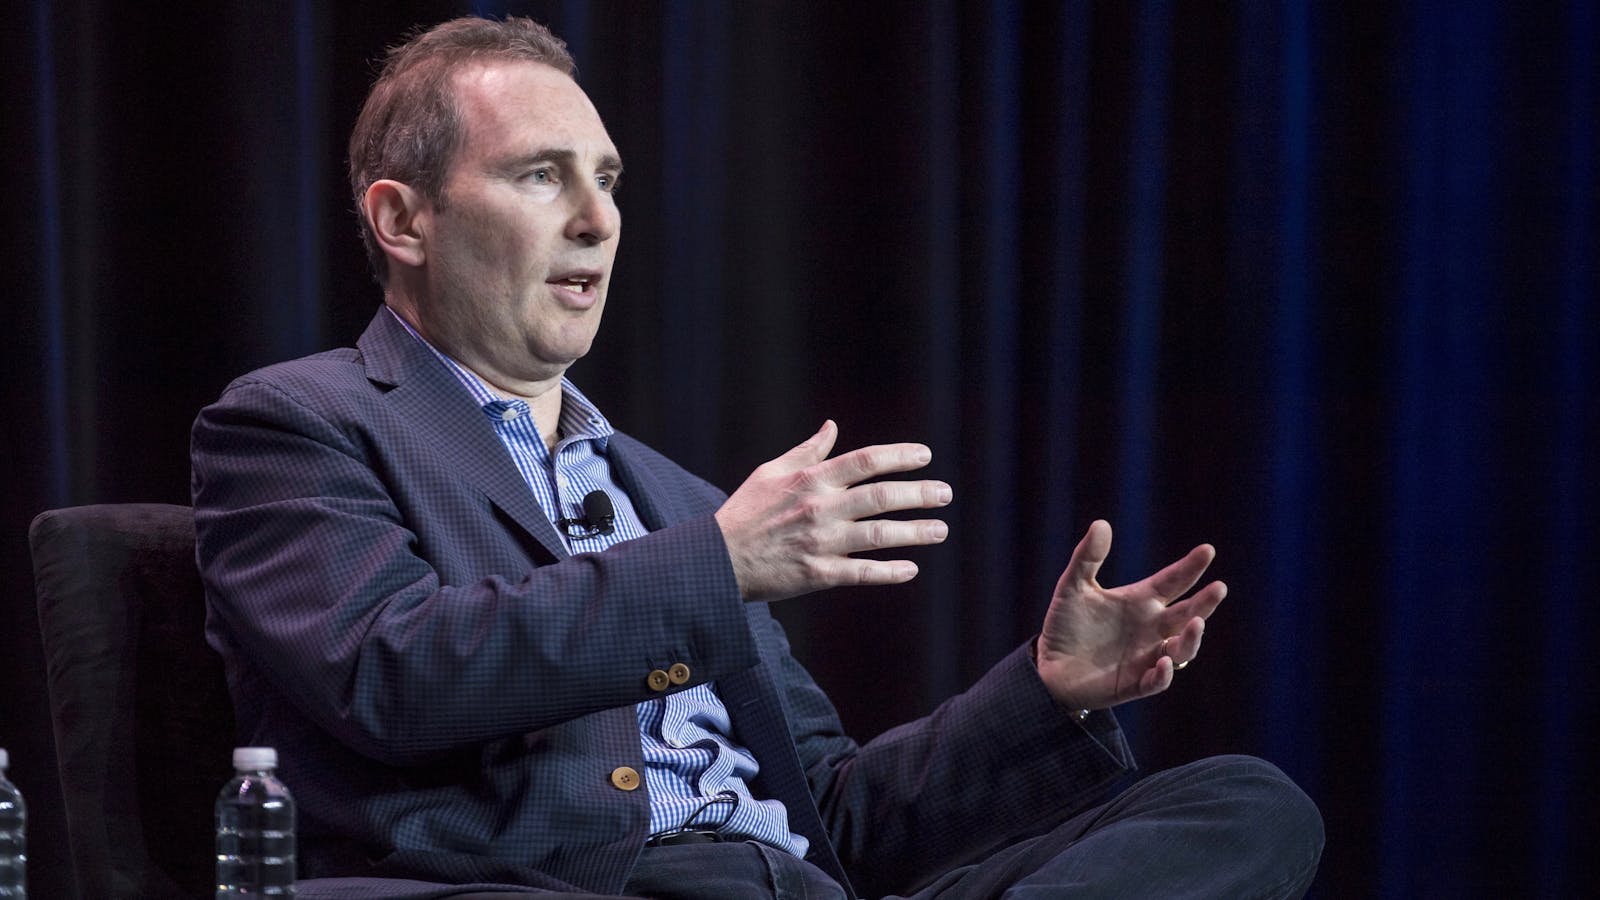 AWS CEO Andrew Jassy. Photo by Bloomberg.